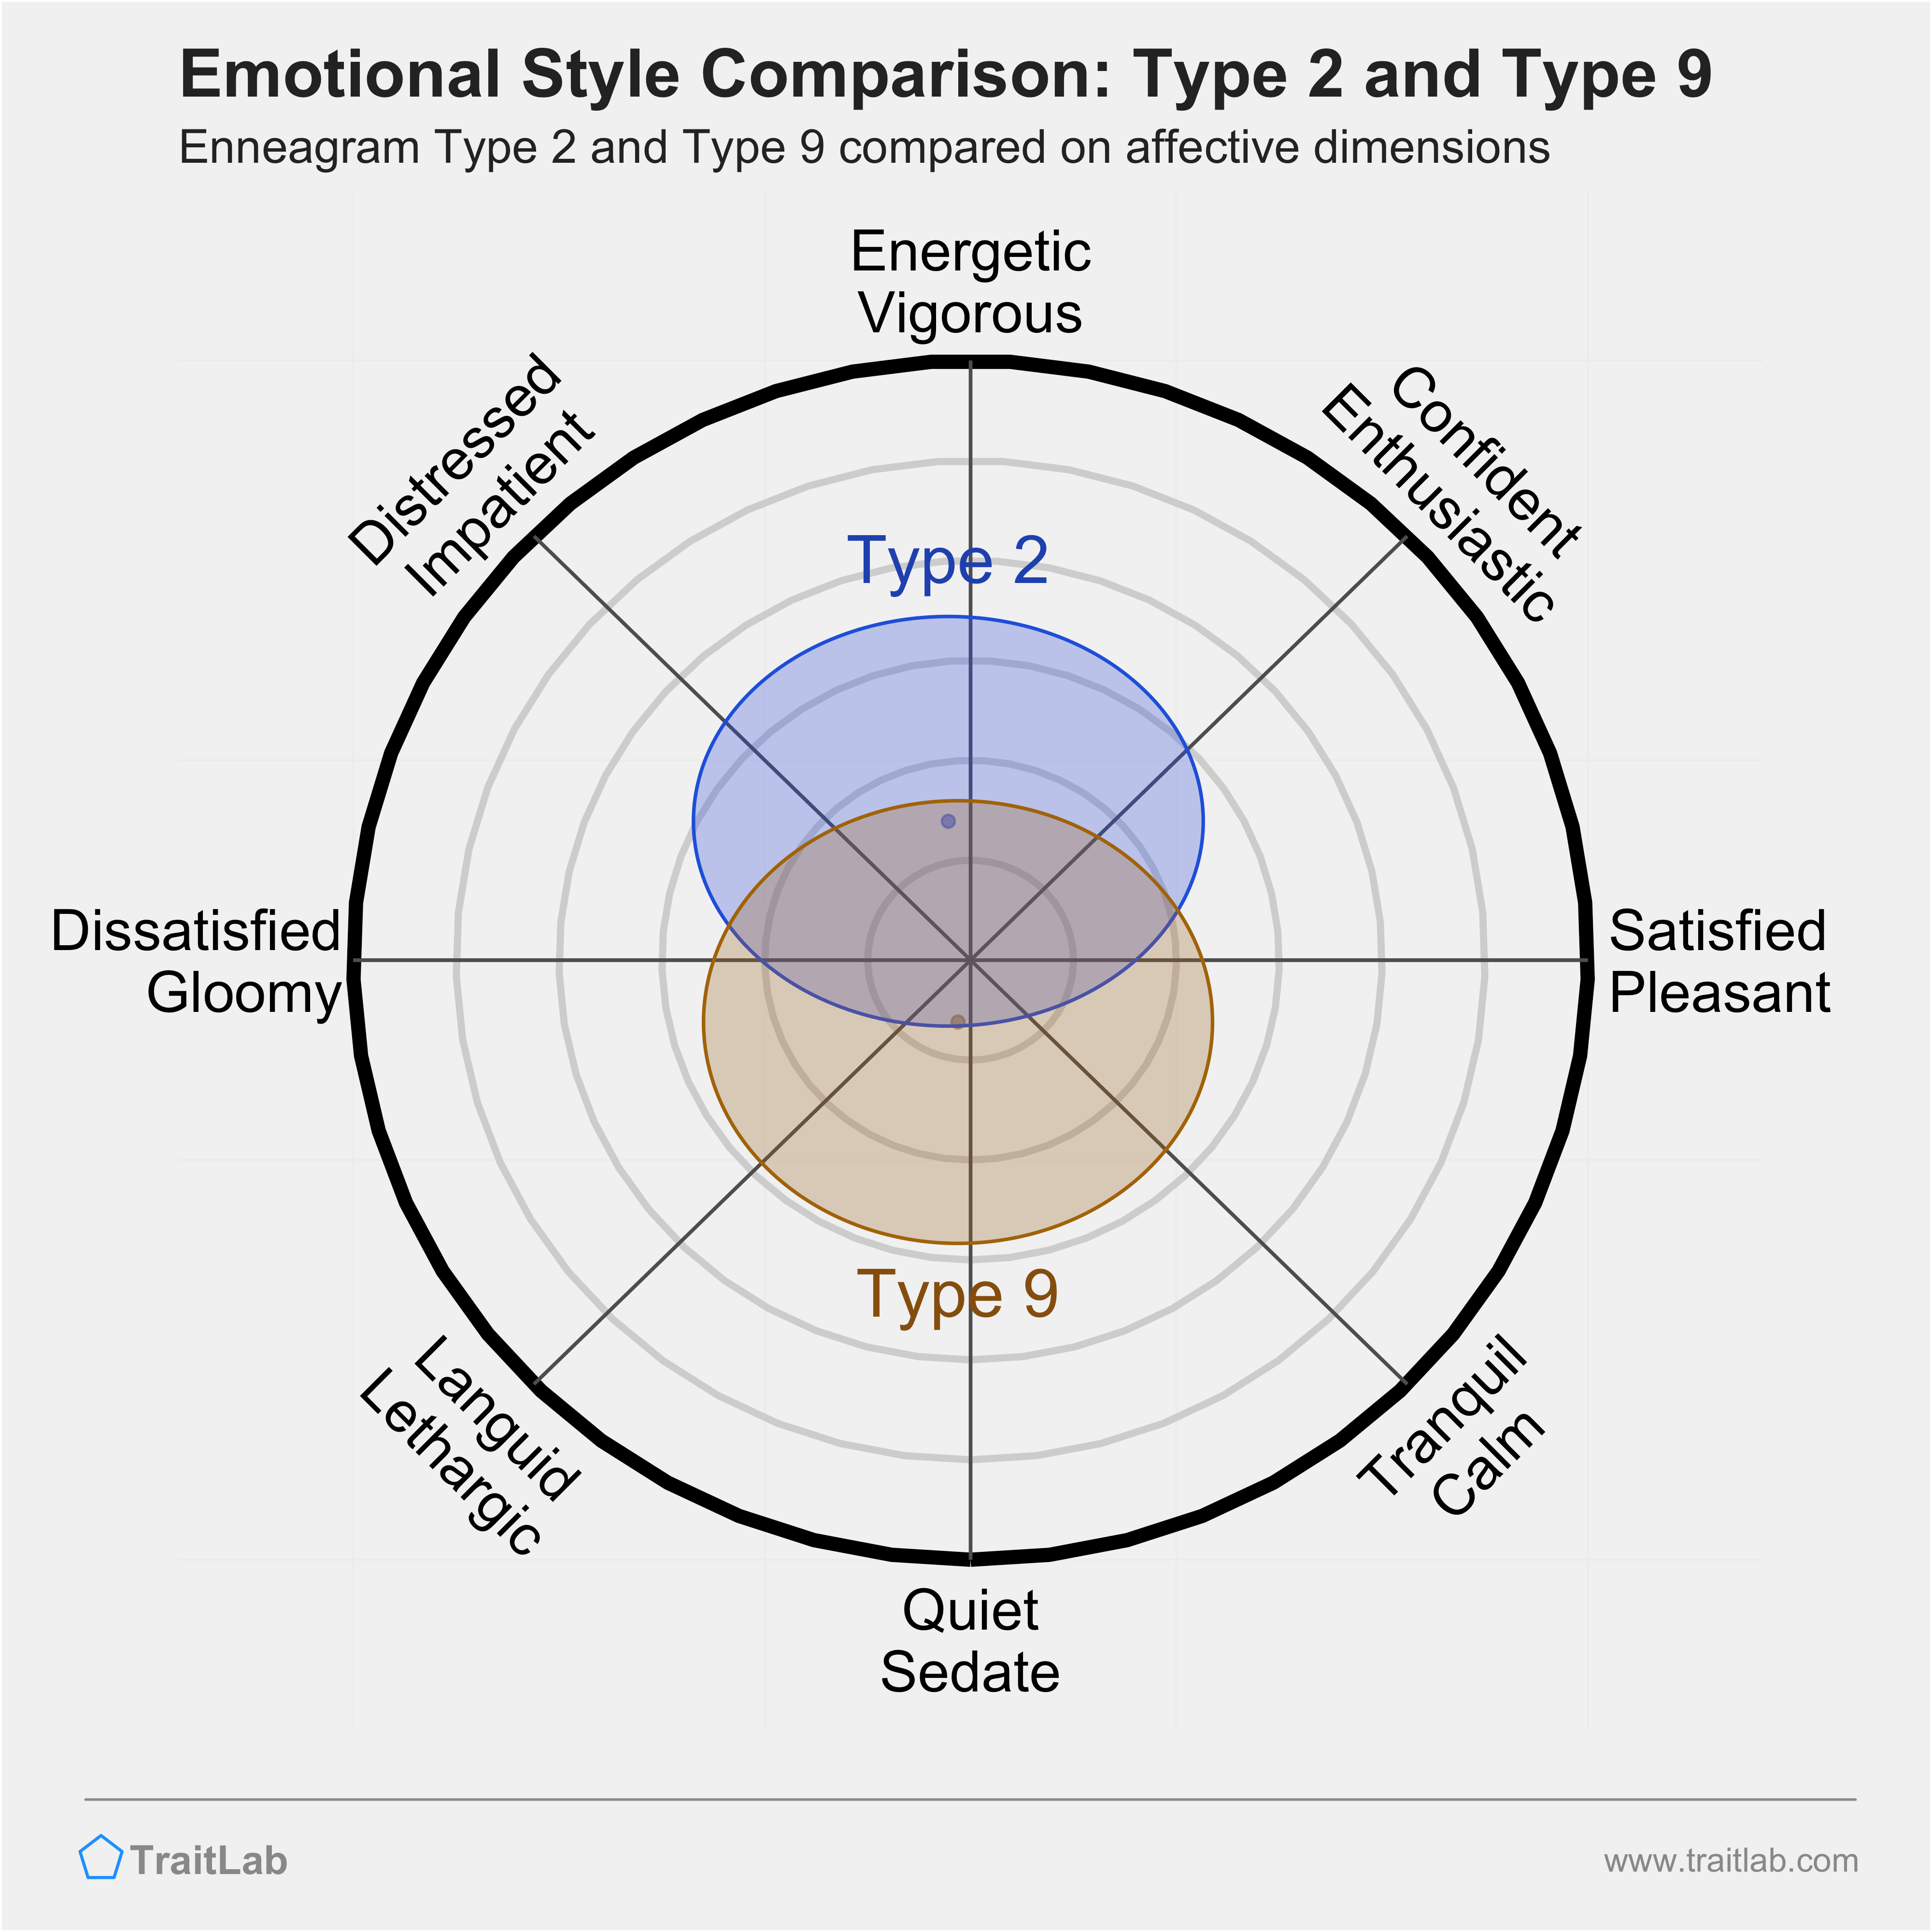 Type 2 and Type 9 comparison across emotional (affective) dimensions